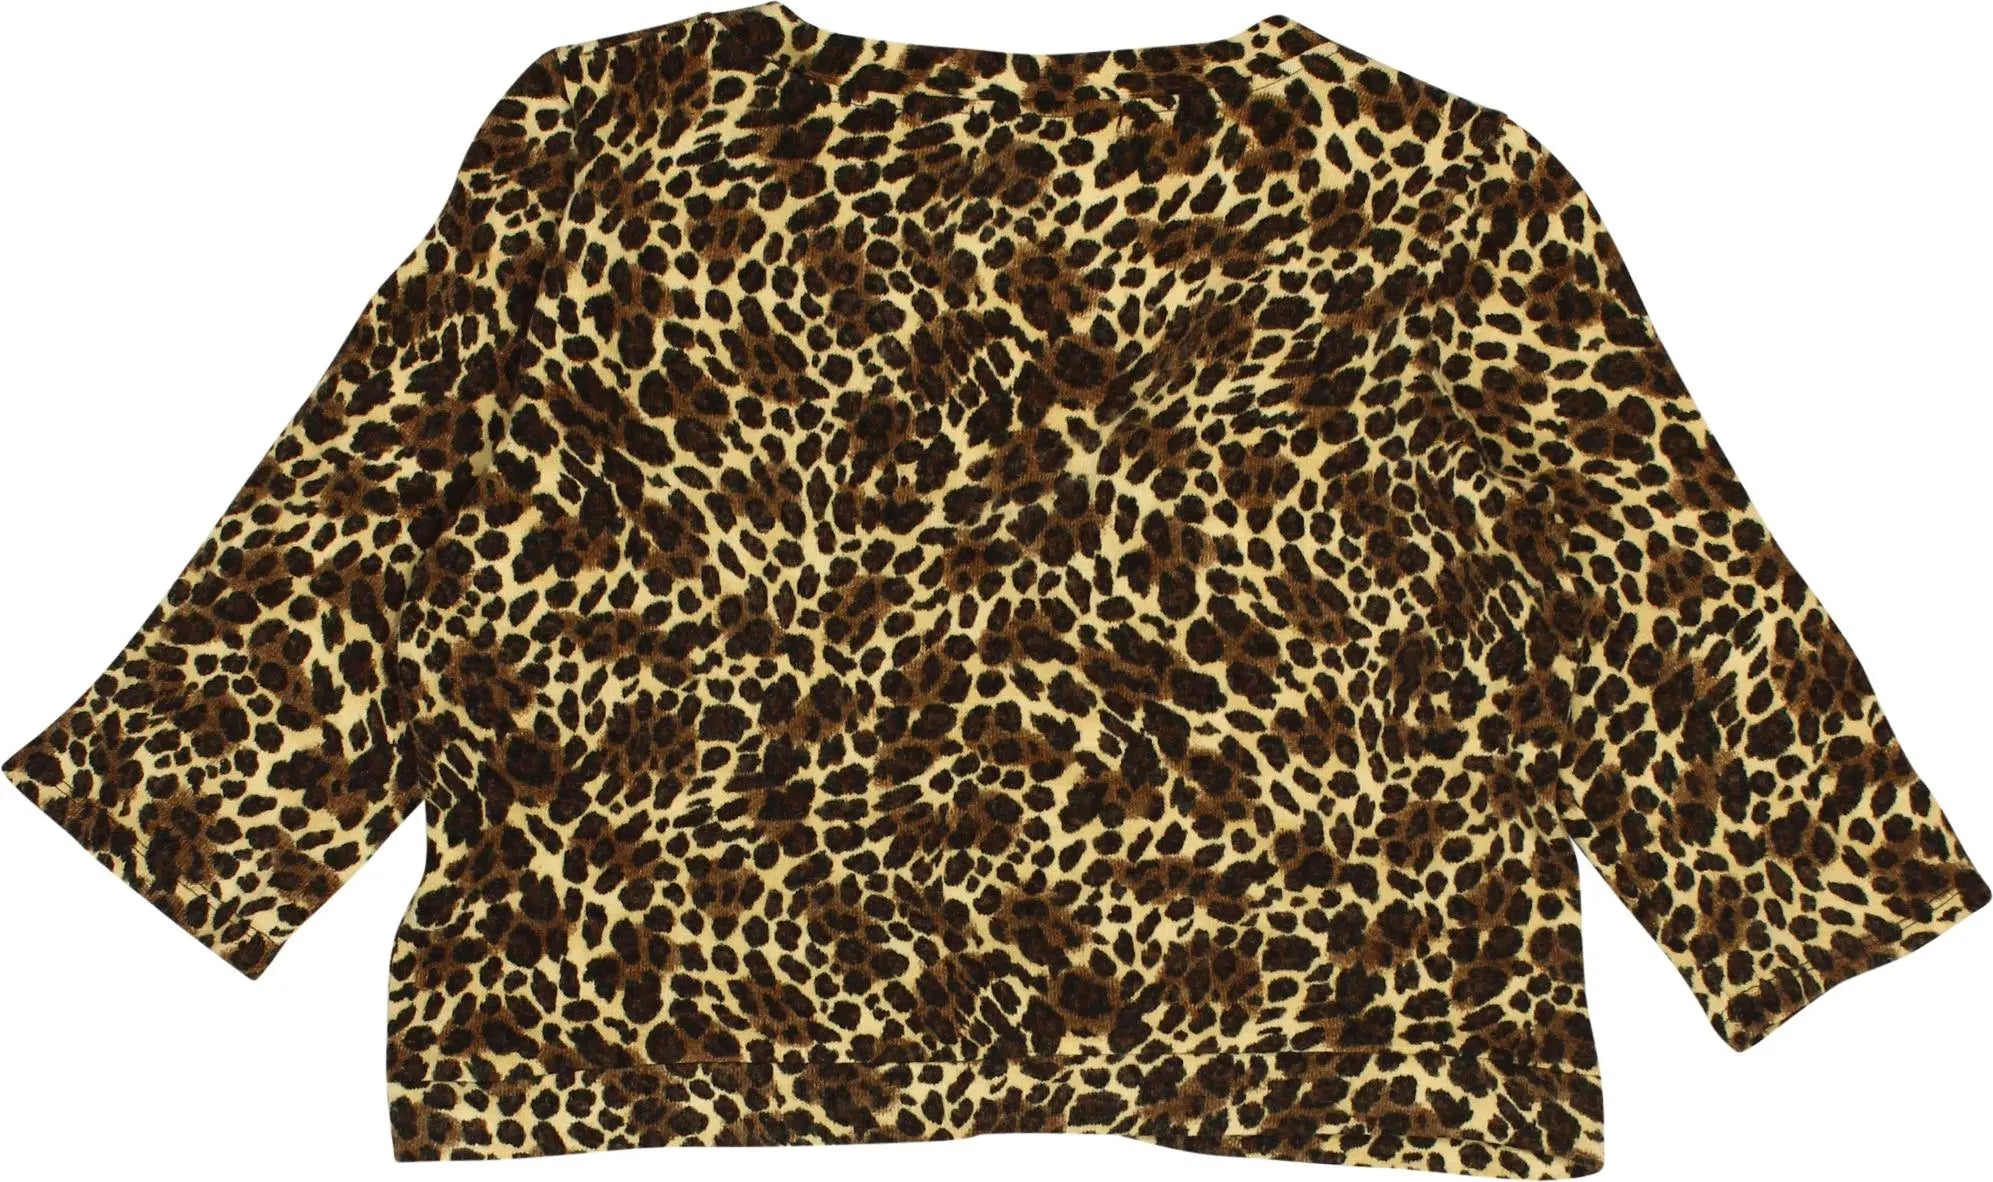 Shana - Leopard Cropped Cardigan- ThriftTale.com - Vintage and second handclothing